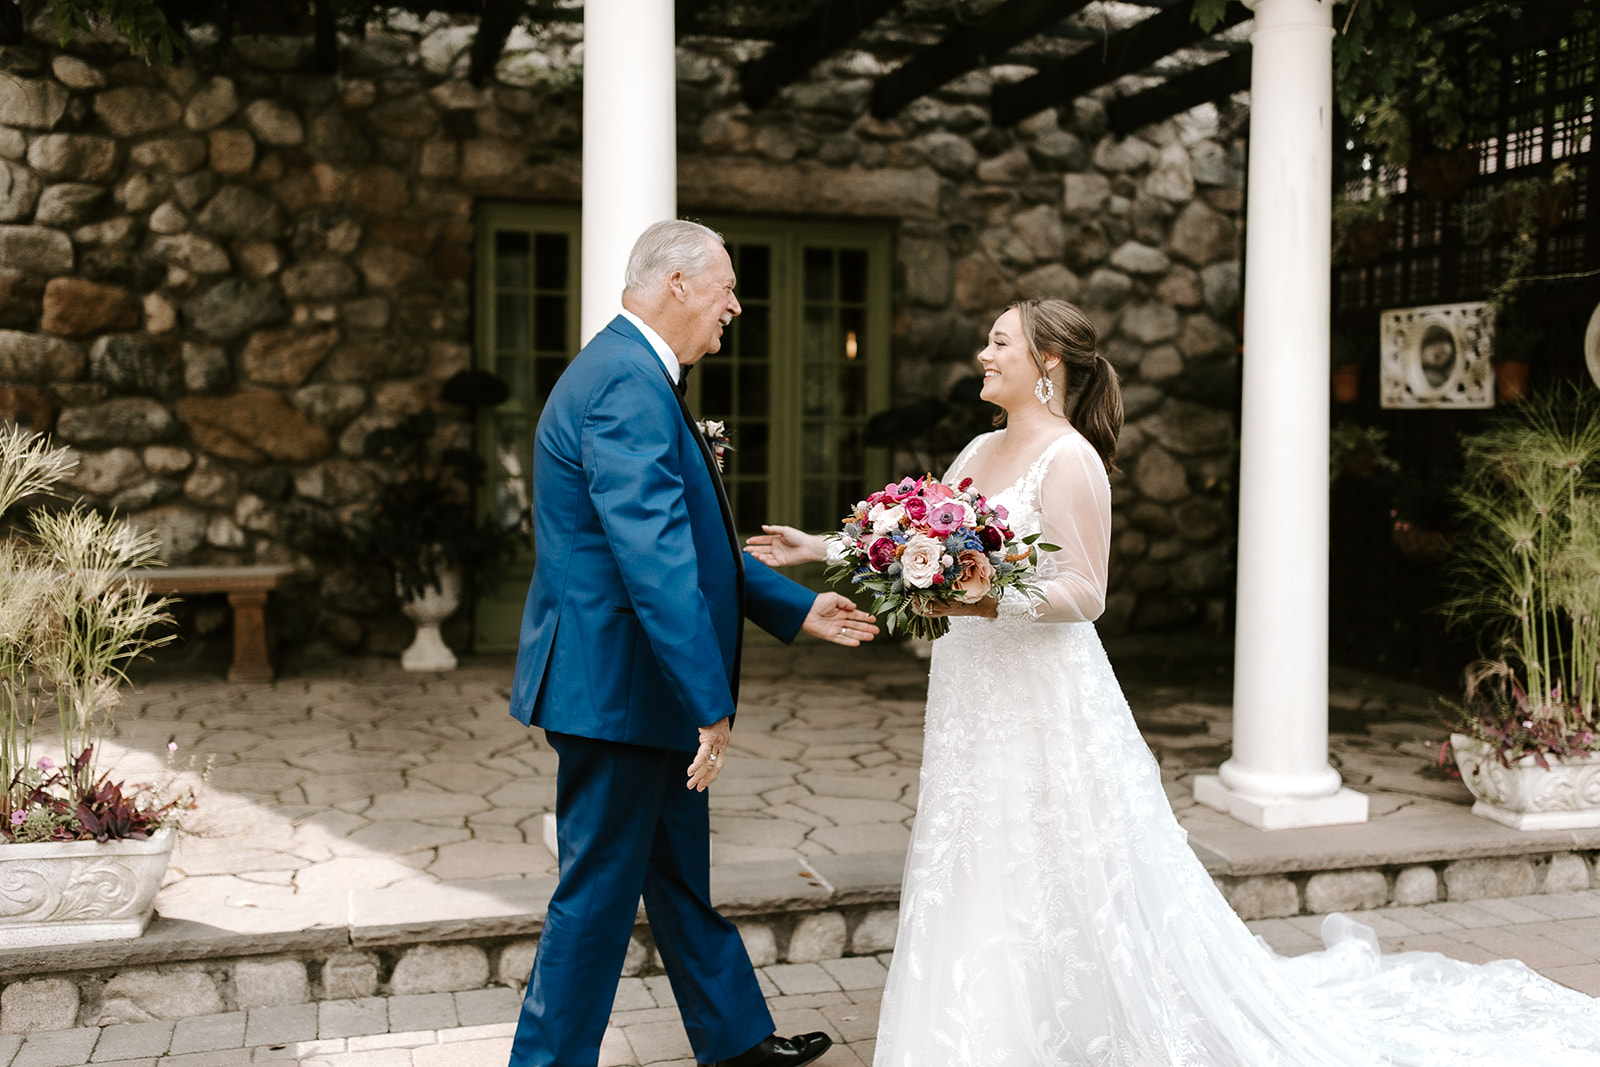 bride shares a loving moment with her dad during their first look photoshoot